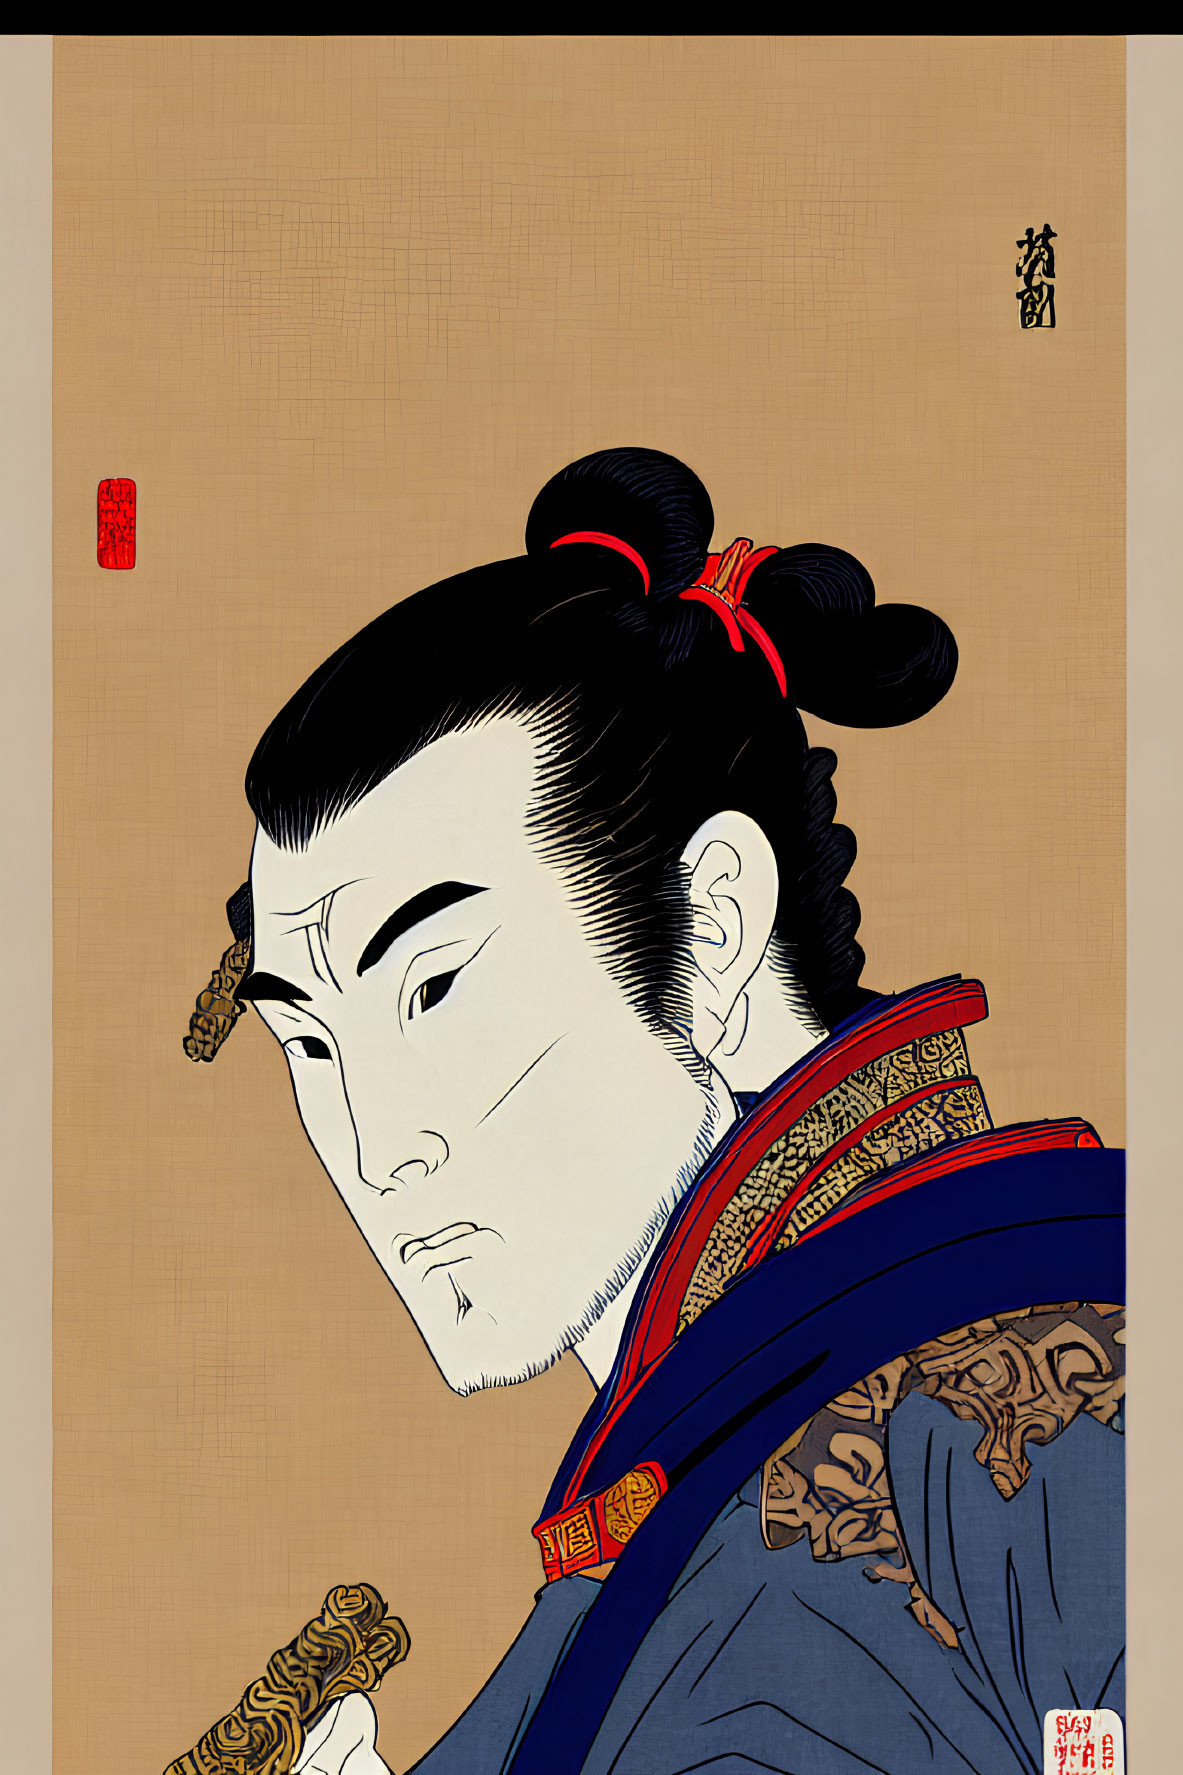 Traditional Japanese woodblock print of a man in blue robe with intricate designs